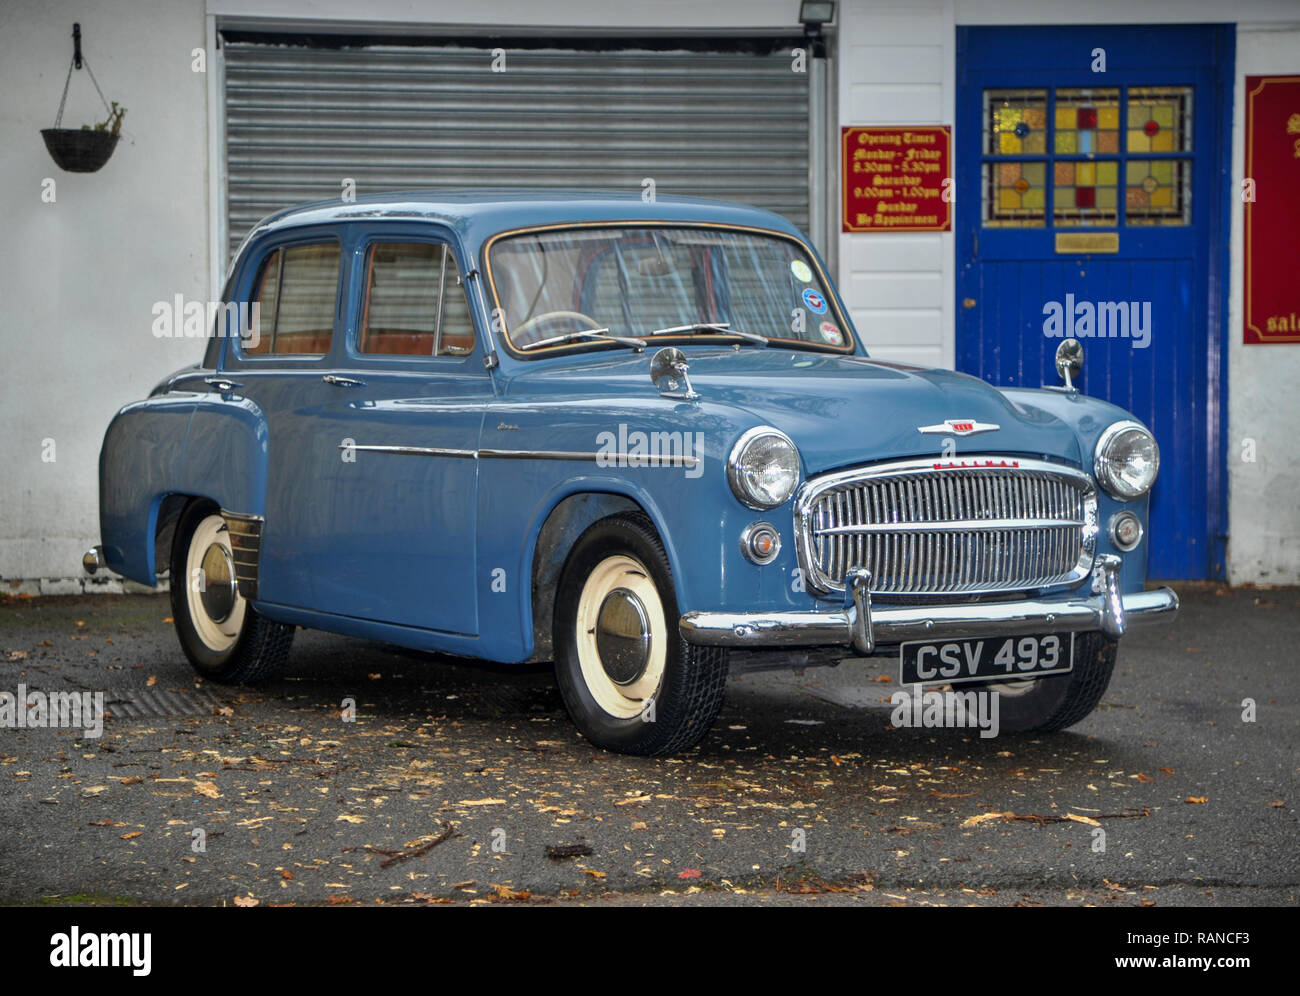 1955 Hillman Minx classic British car from the Rootes Group Stock Photo